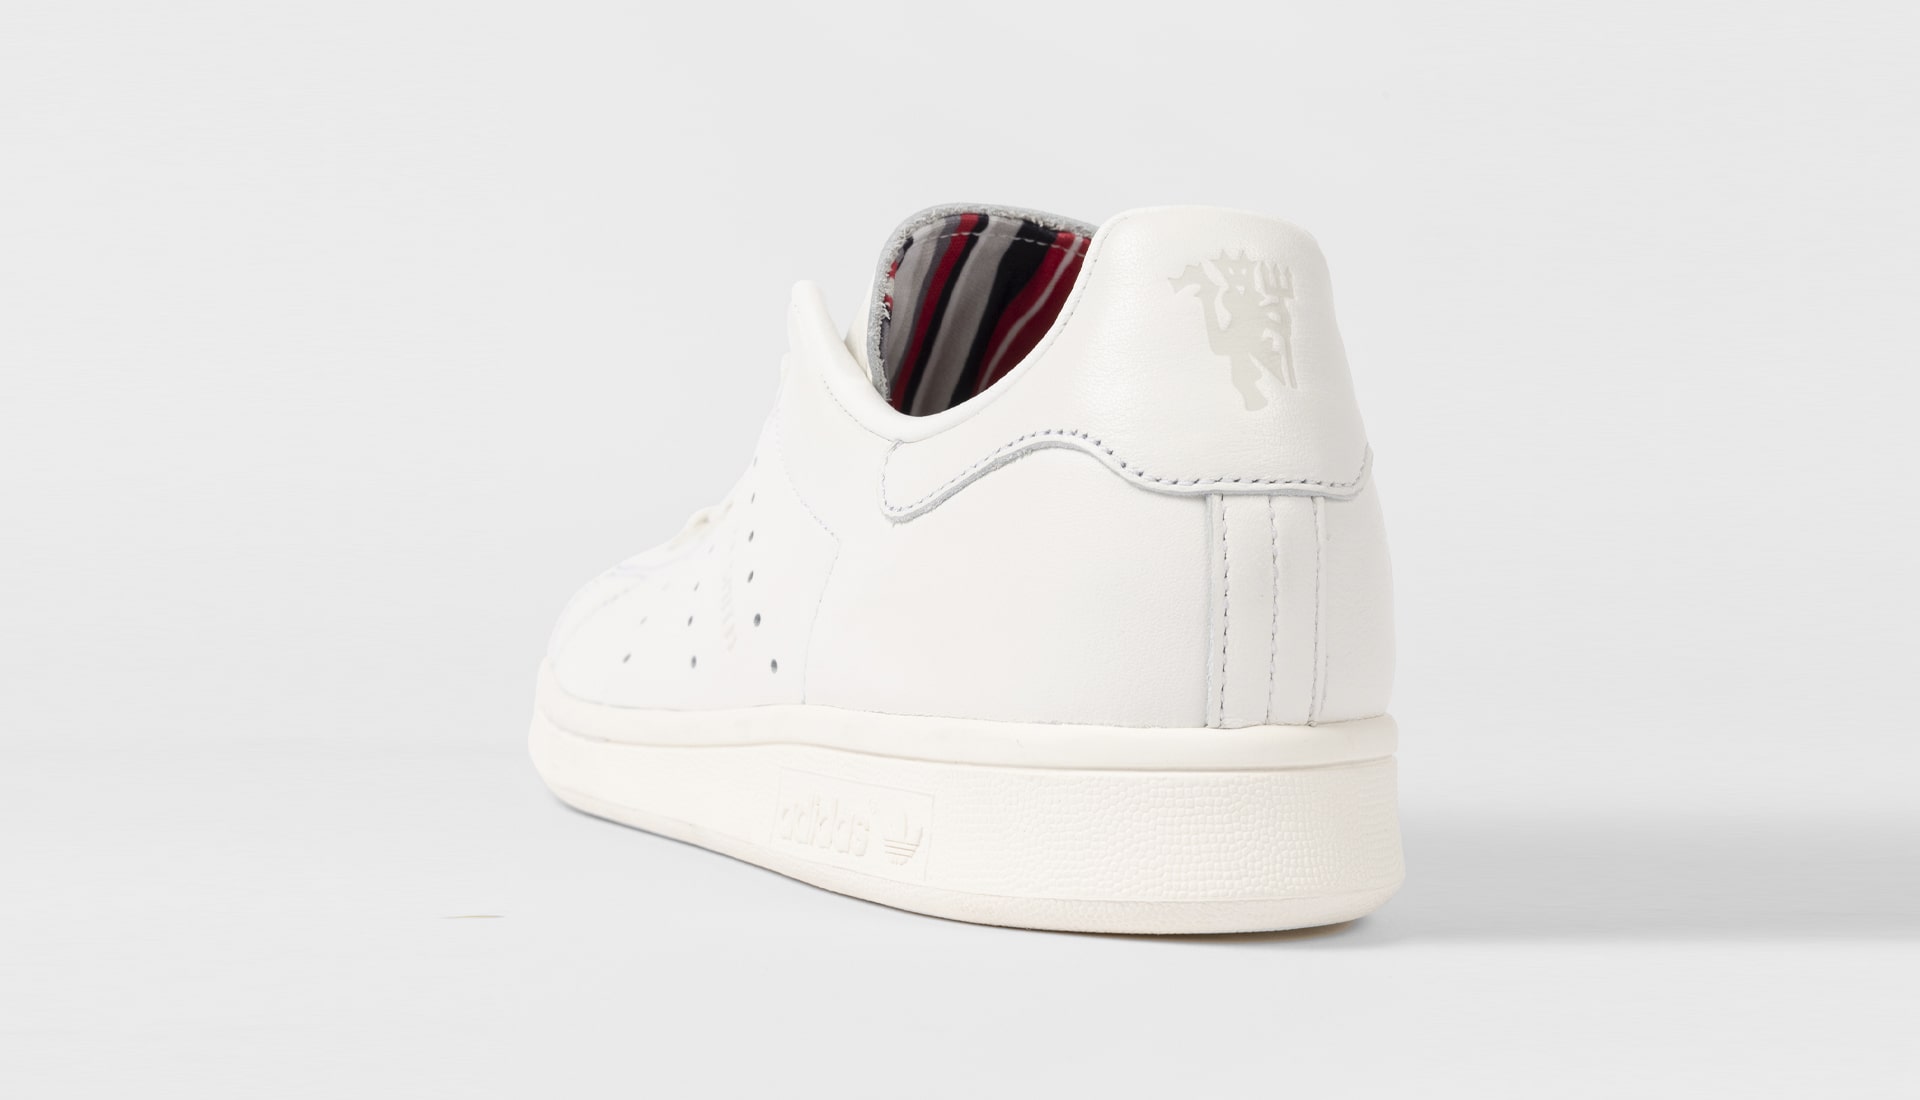 Paul Smith, adidas & Man United Team Up For Special Edition Stan Smith